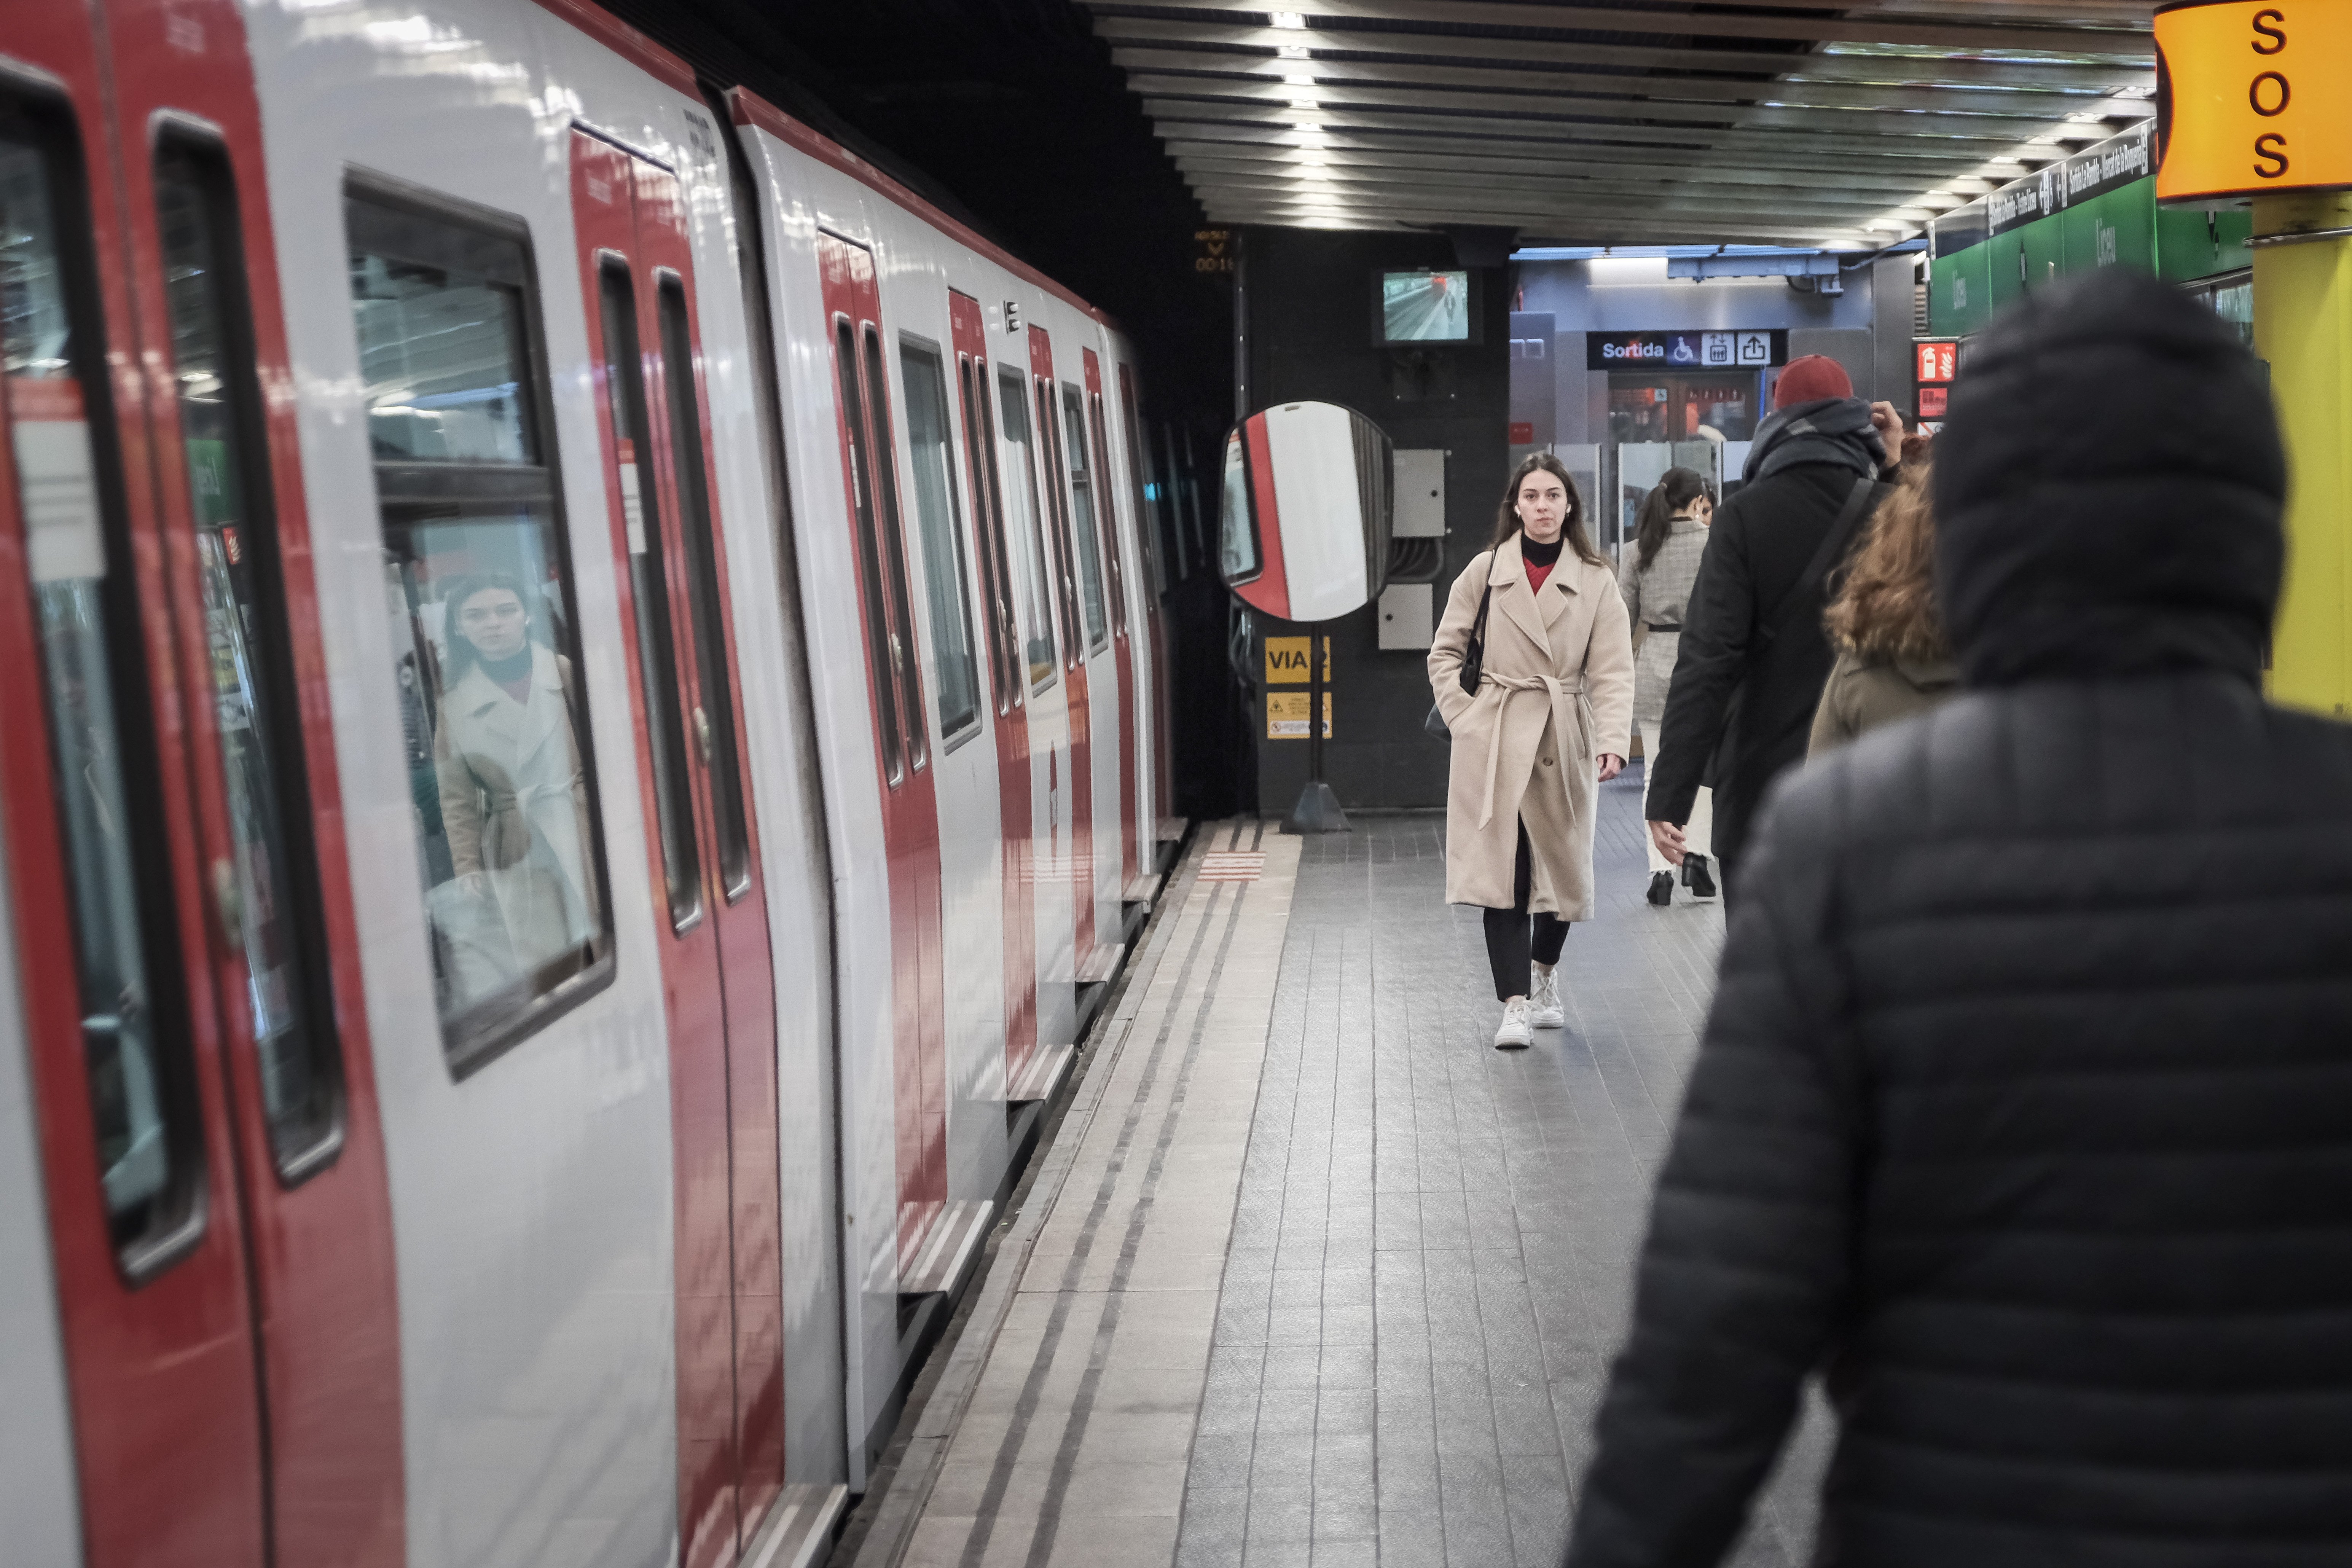 Barcelona's metro schedule for MWC 2023: How to get to the congress by public transport